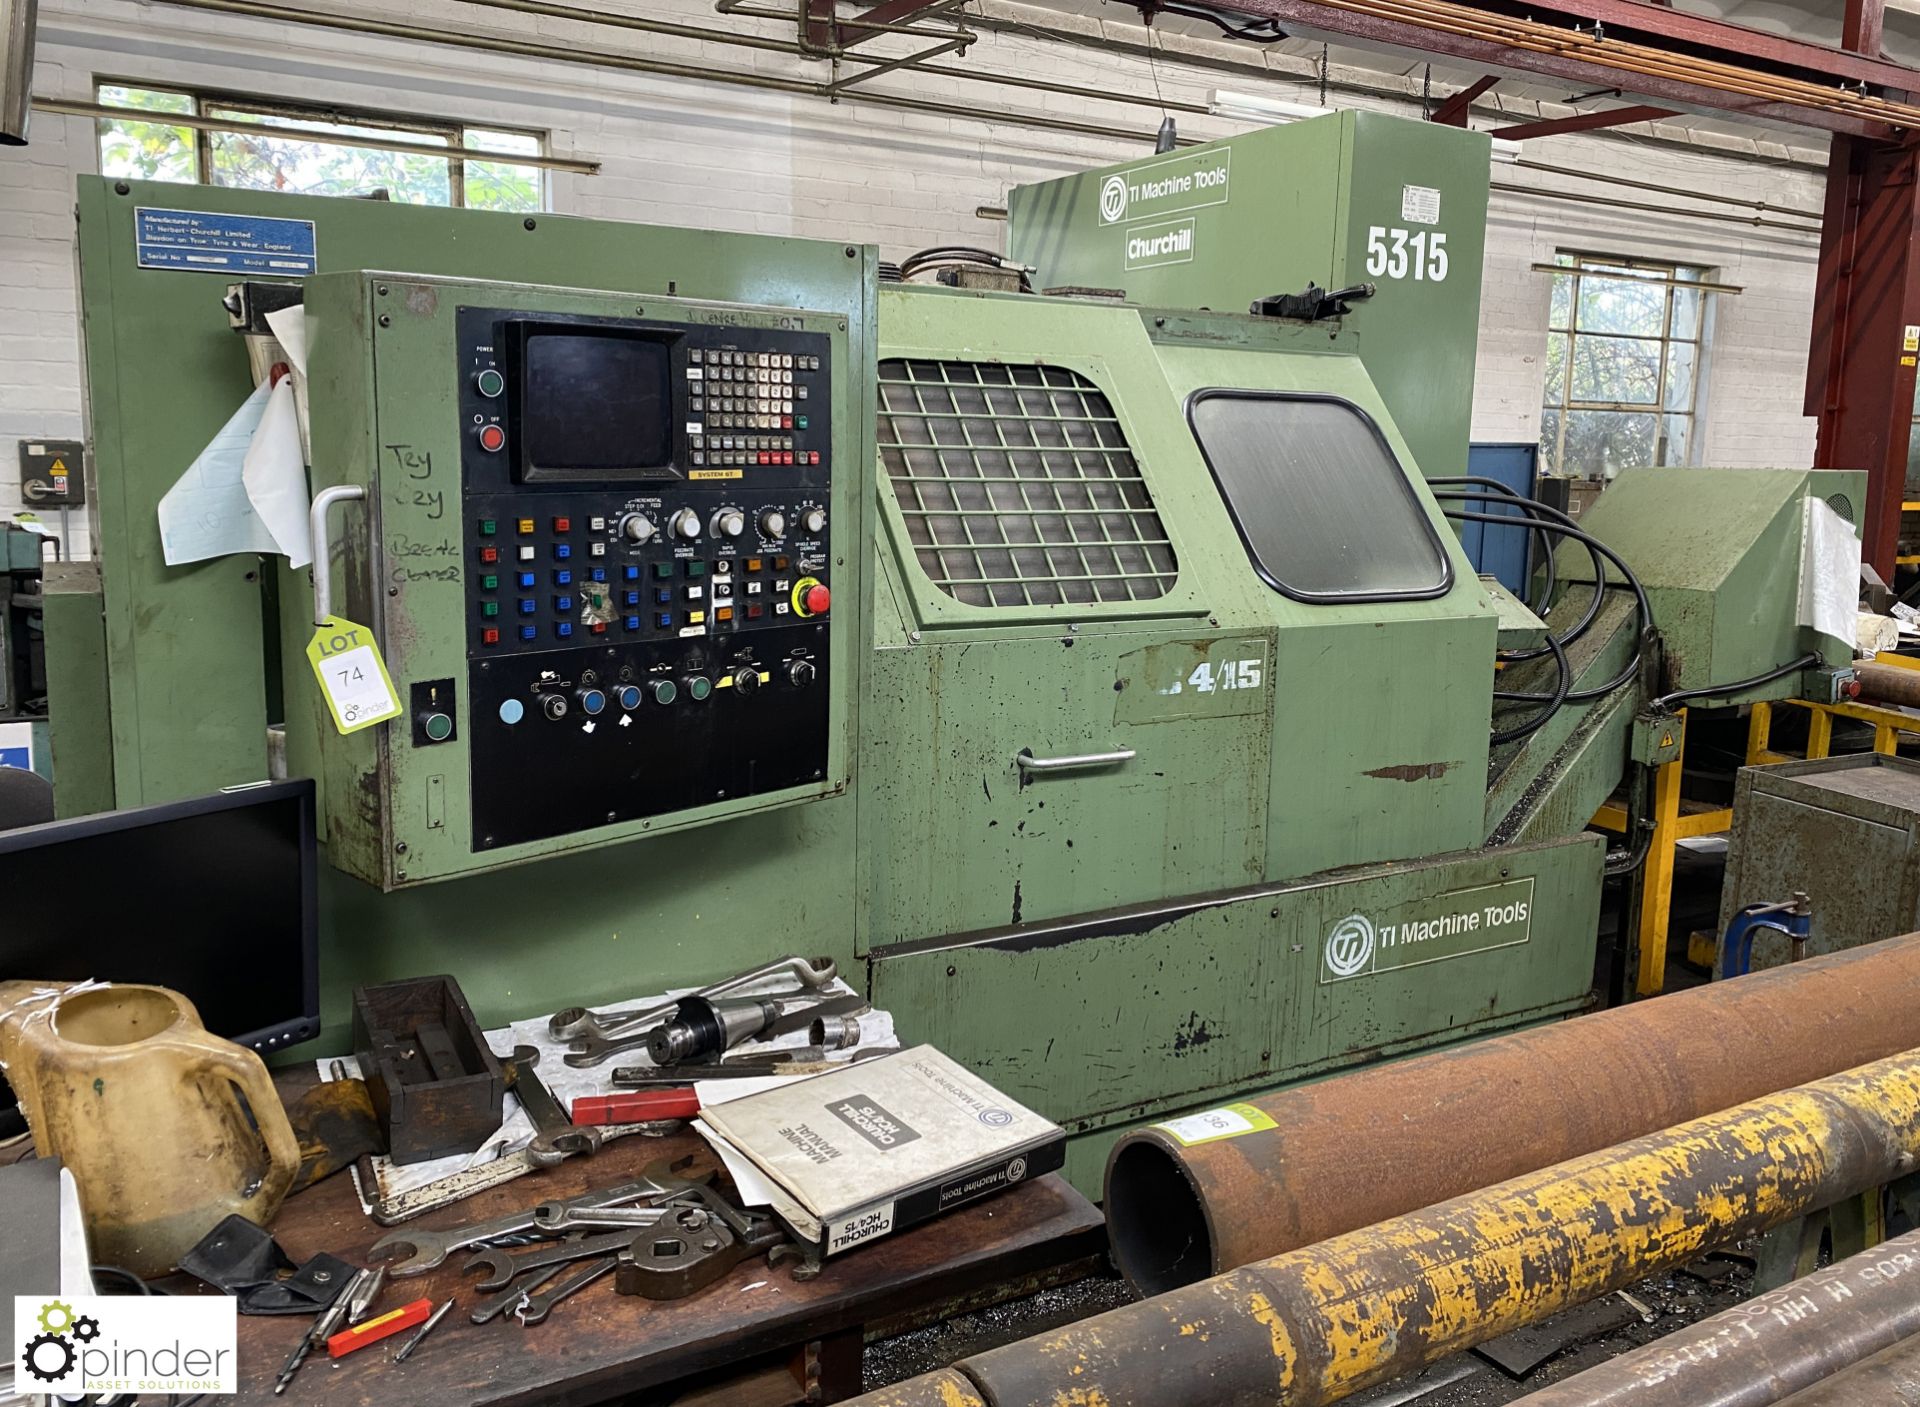 Churchill HC4/15 CNC slant bed Lathe, with Fanuc system 6T control, serial number 20187 (please note - Image 16 of 18